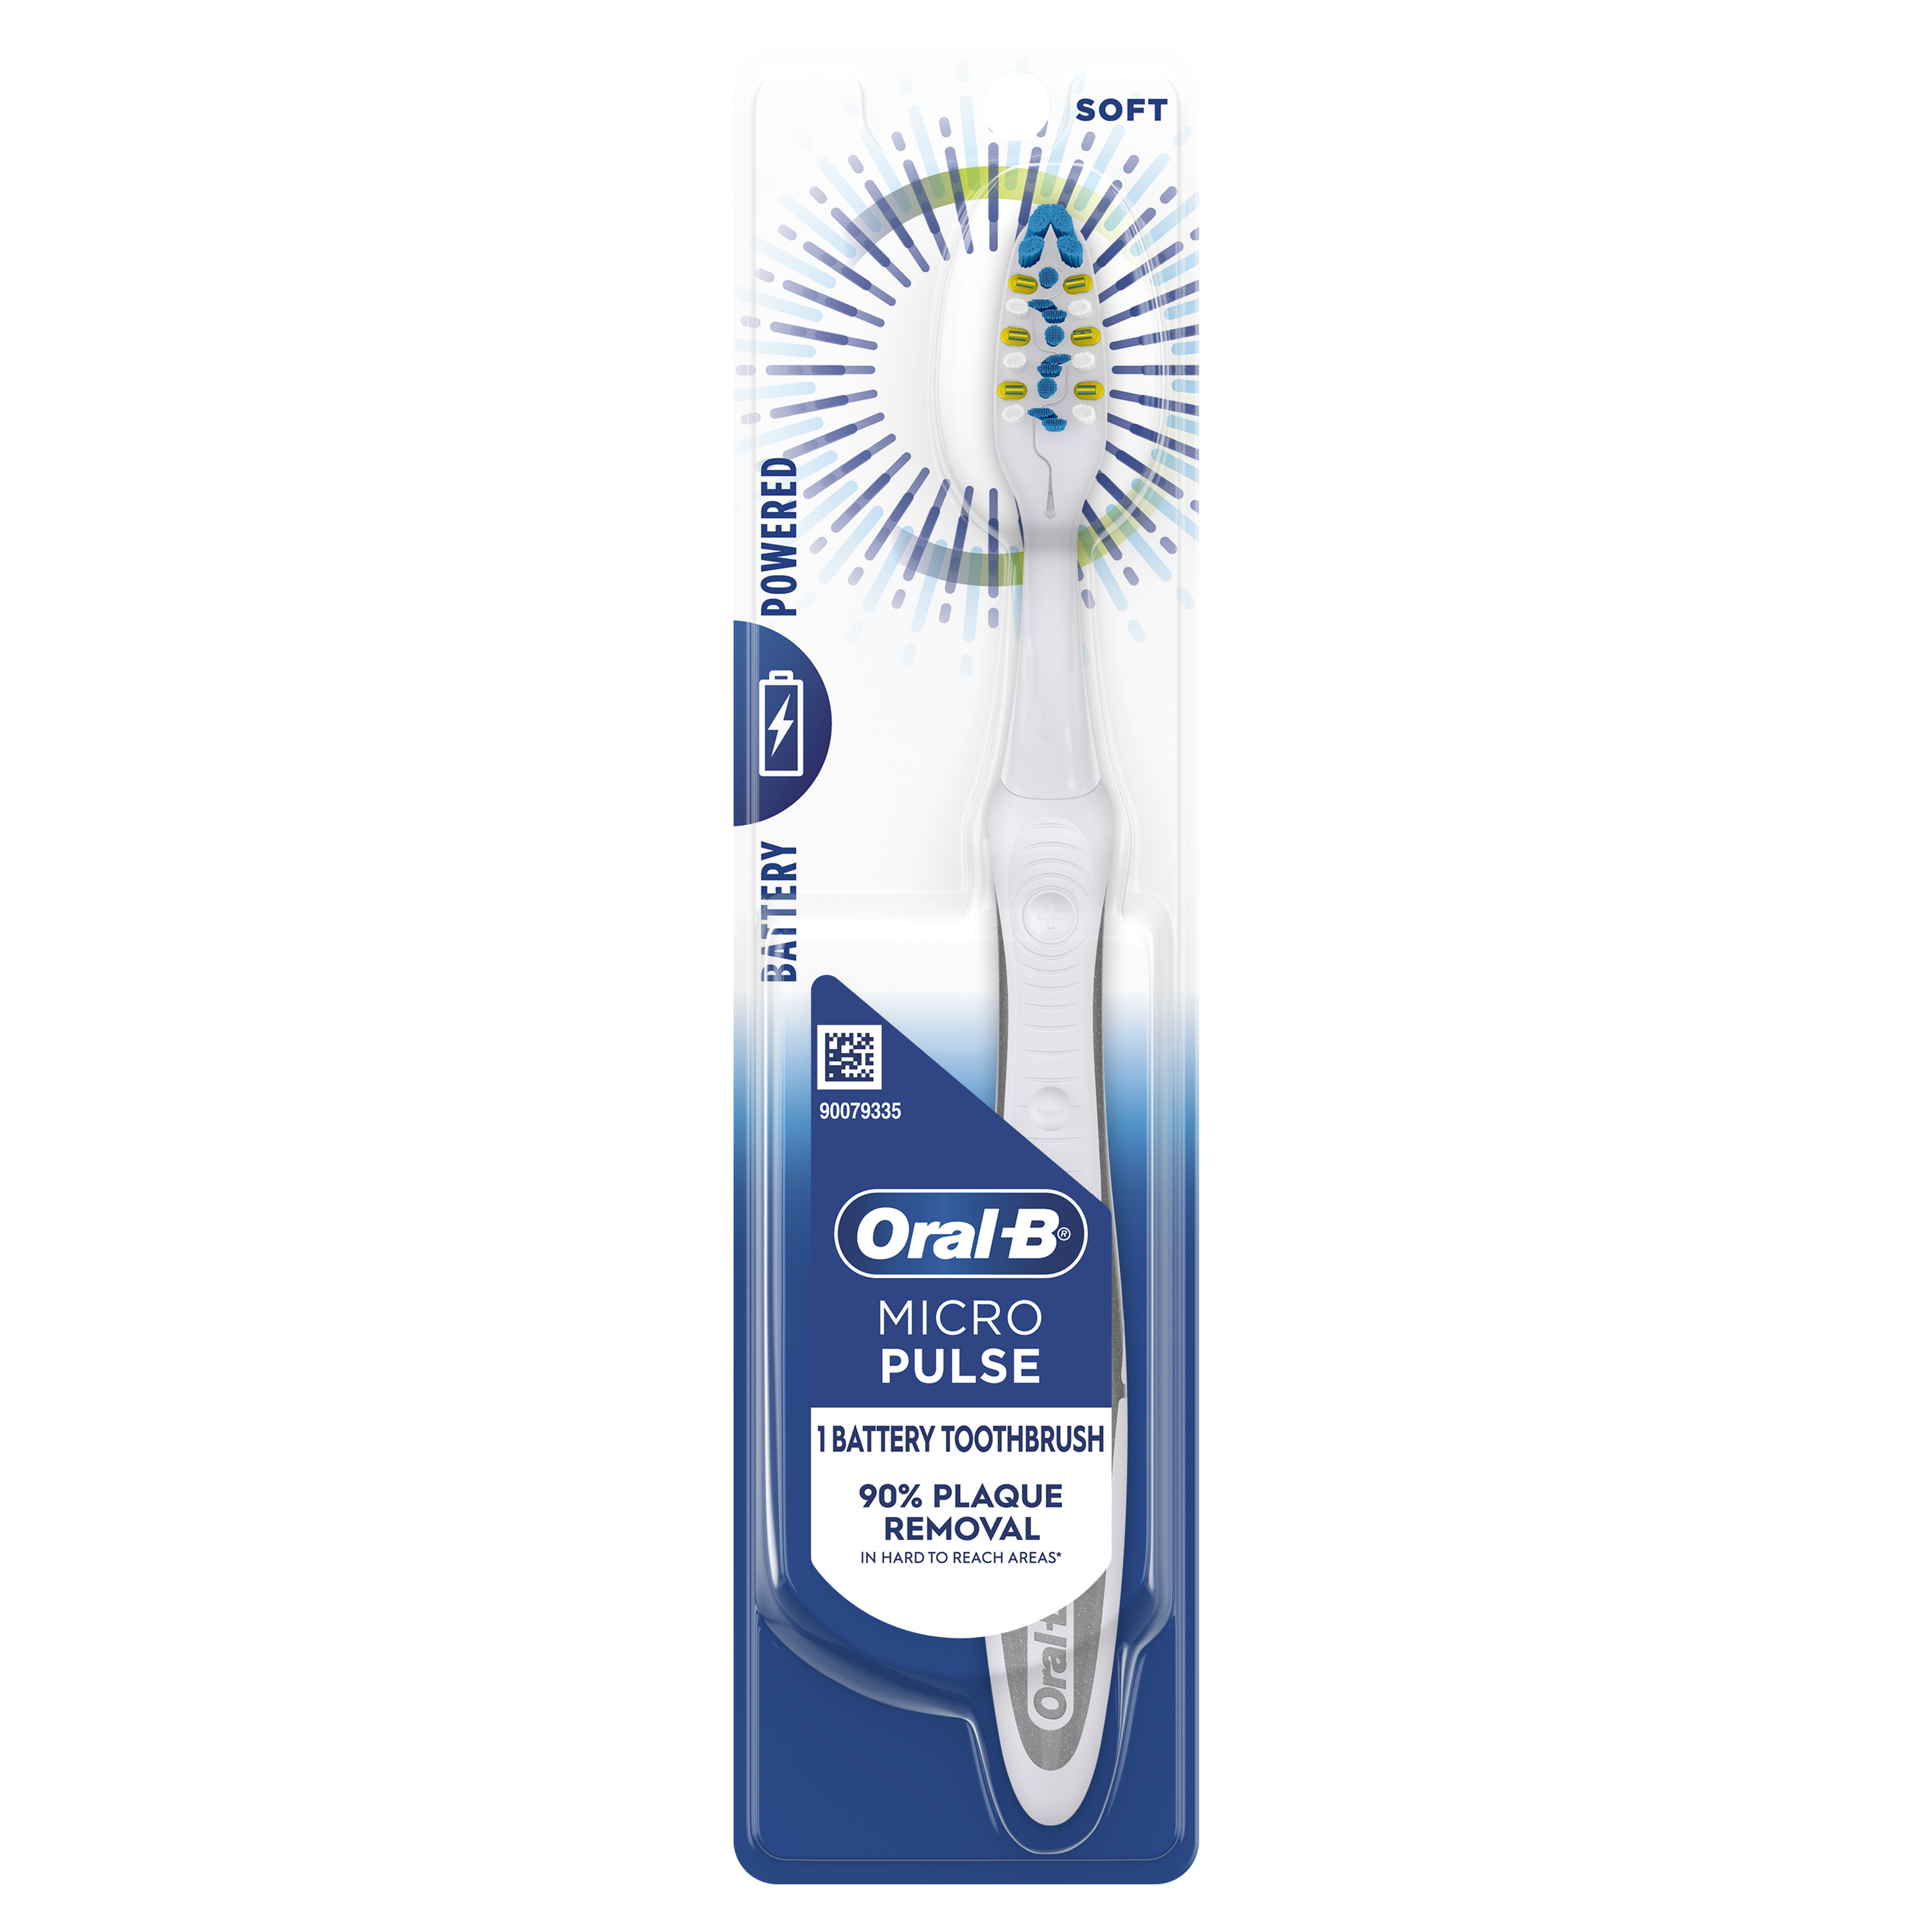 Oral-B Micro Pulse Battery Electric Toothbrush, Soft, 1 Ct - image 1 of 11